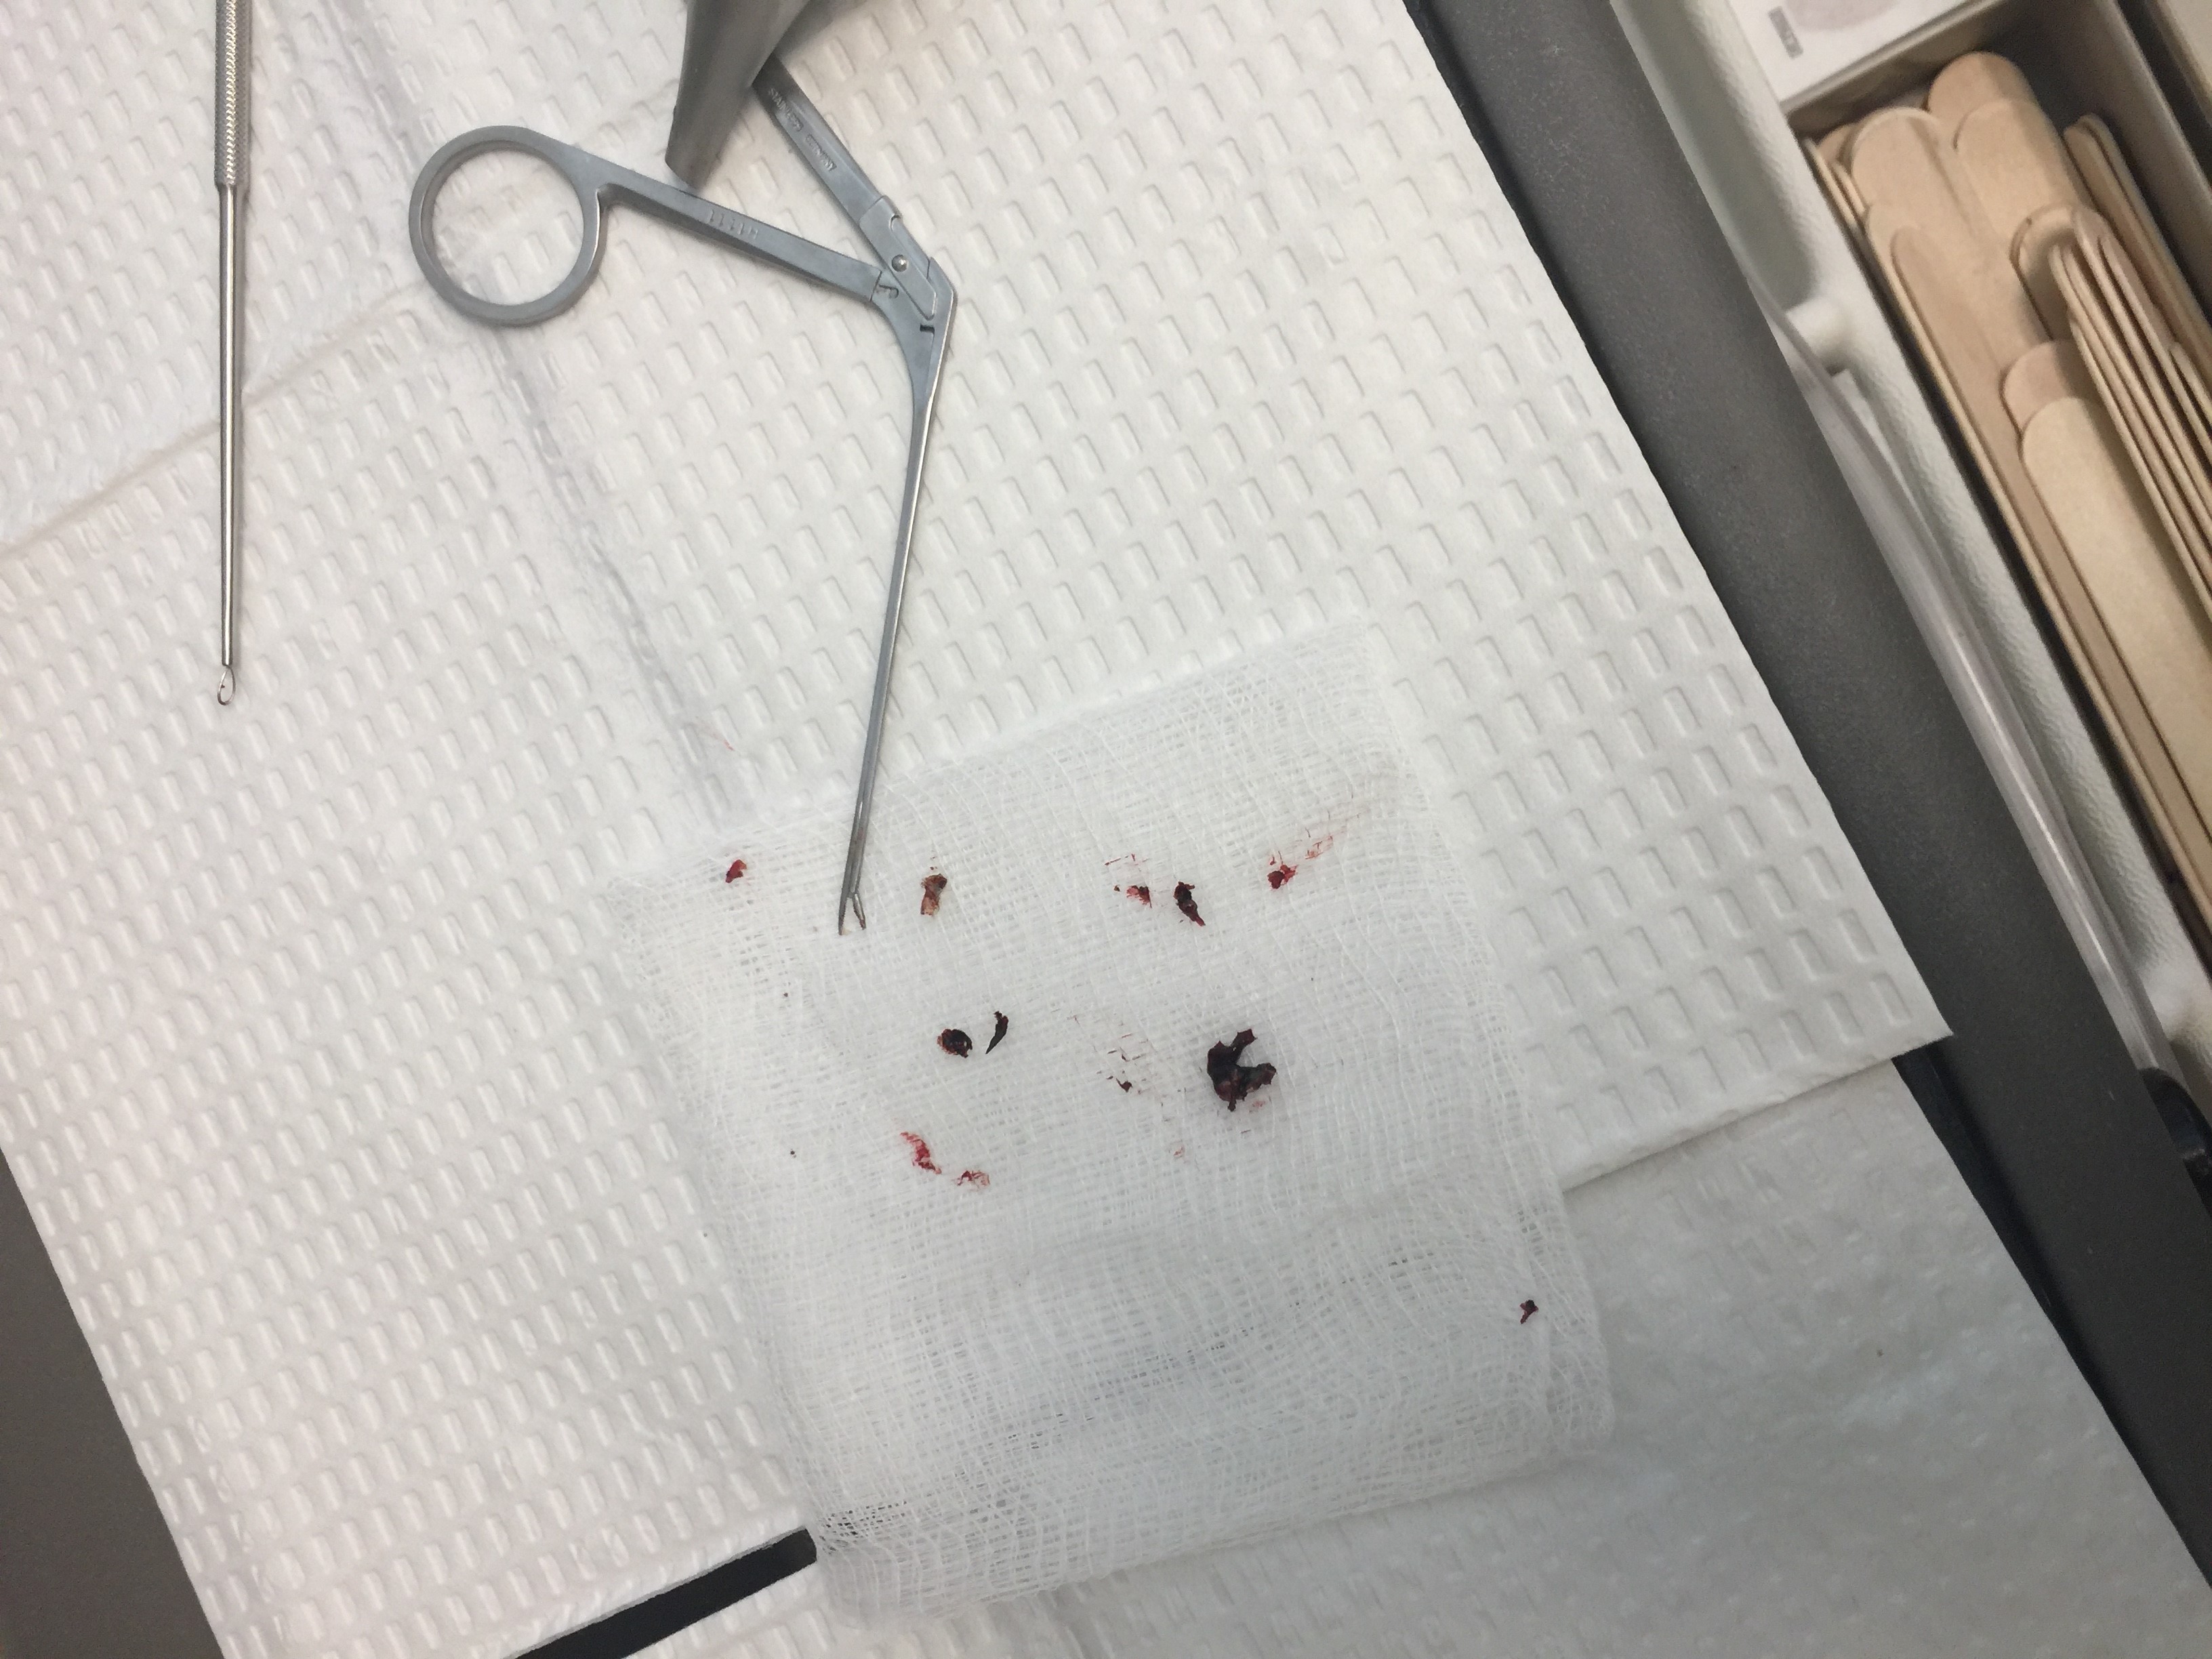 Photo of the blood clots removed by the ENT from my ear canals